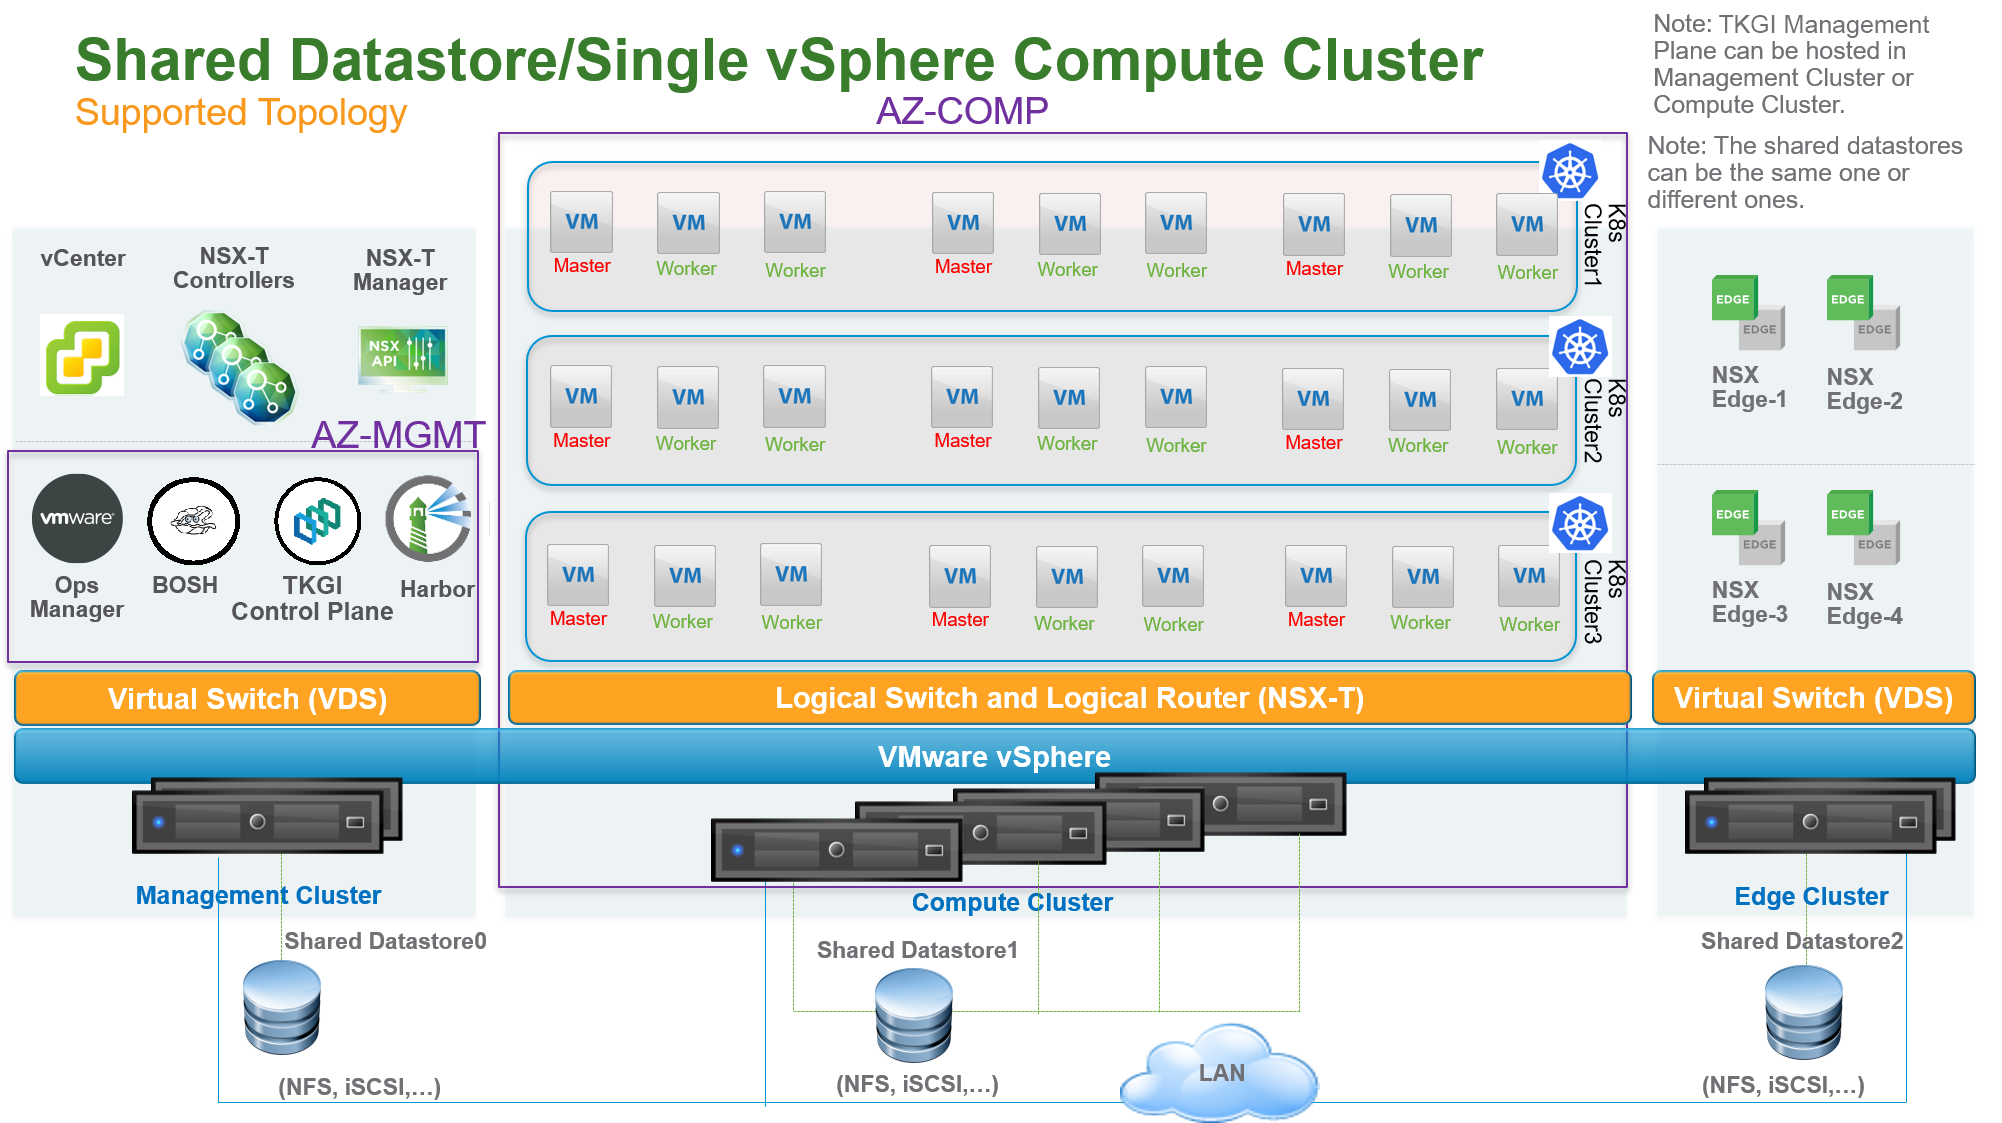 Single vSphere compute cluster with file system datastore